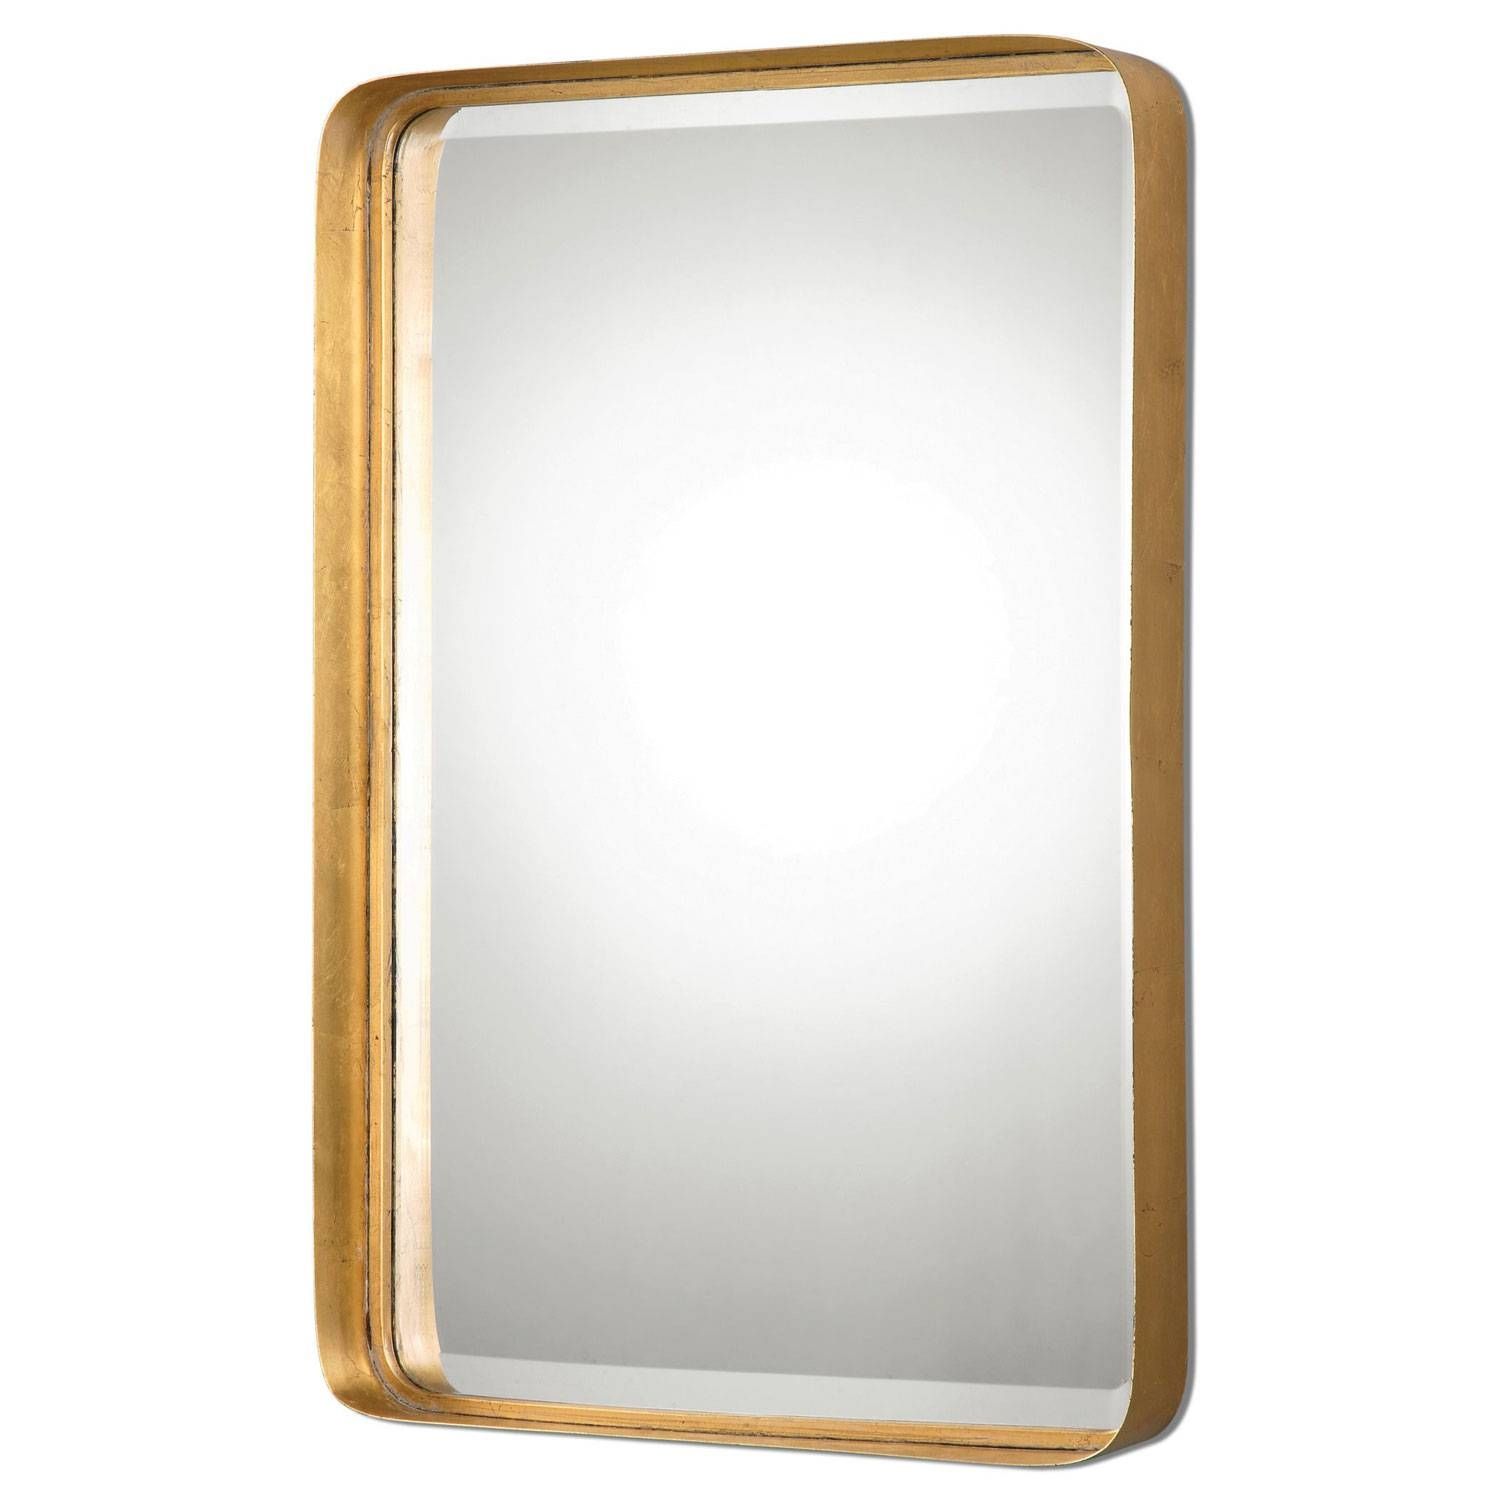 Crofton Antique Gold Mirror Uttermost Wall Mirror Mirrors Home Decor With Antiqued Wall Mirrors (View 14 of 25)